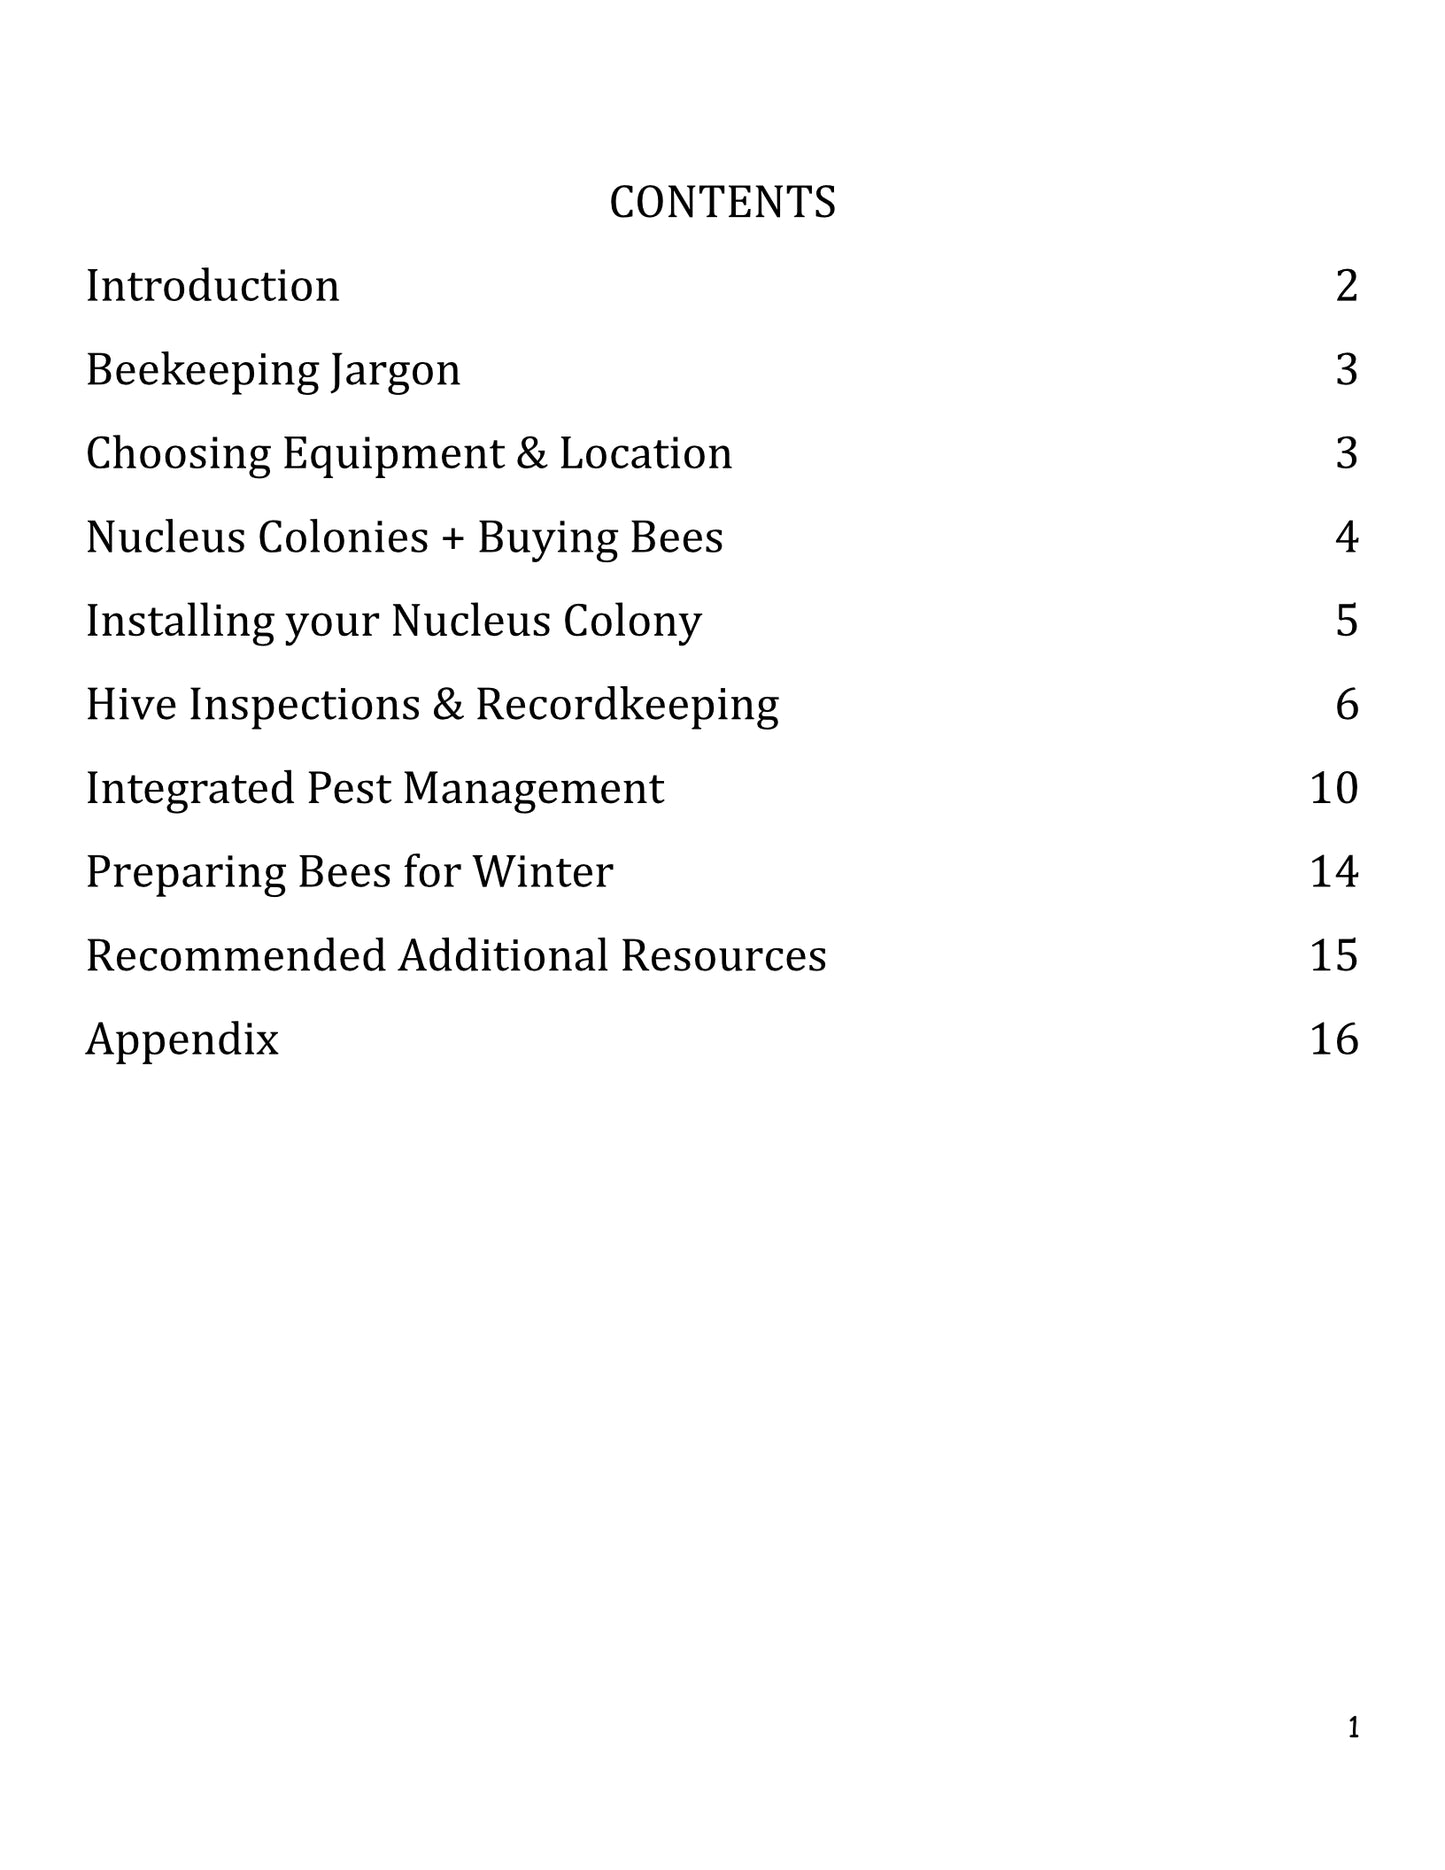 List of Contents in New Beekeeper Guide